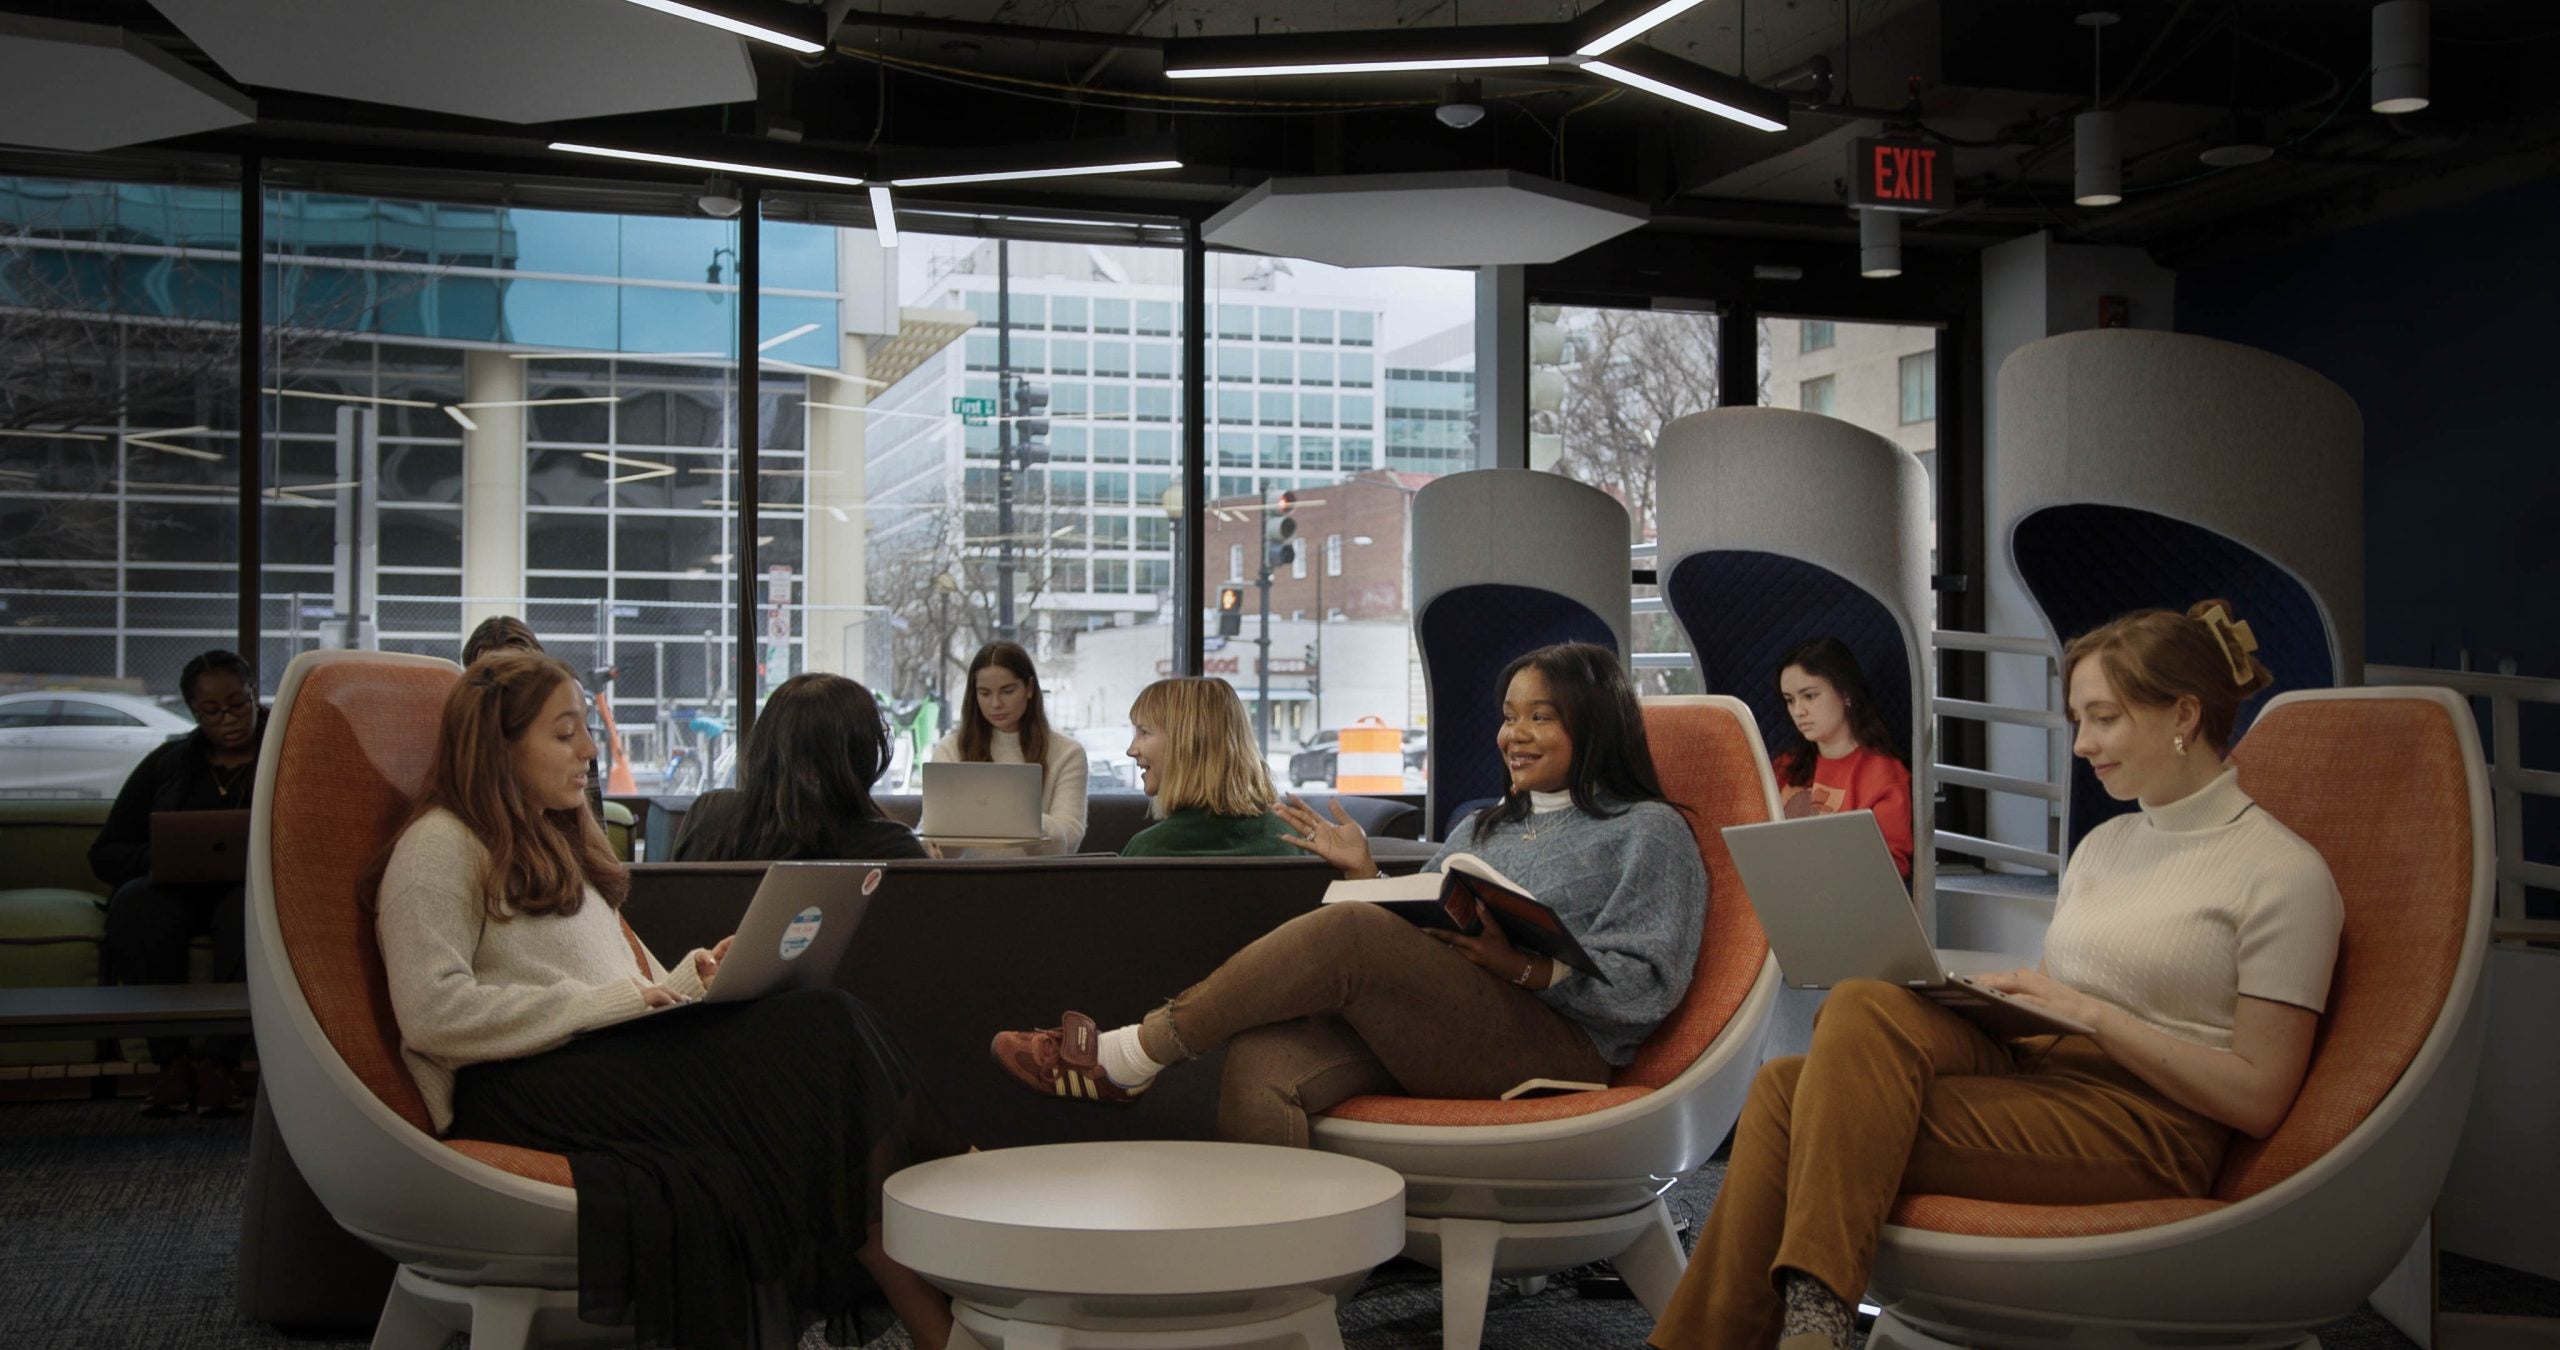 Students sitting and studying in study pods in an indoor space